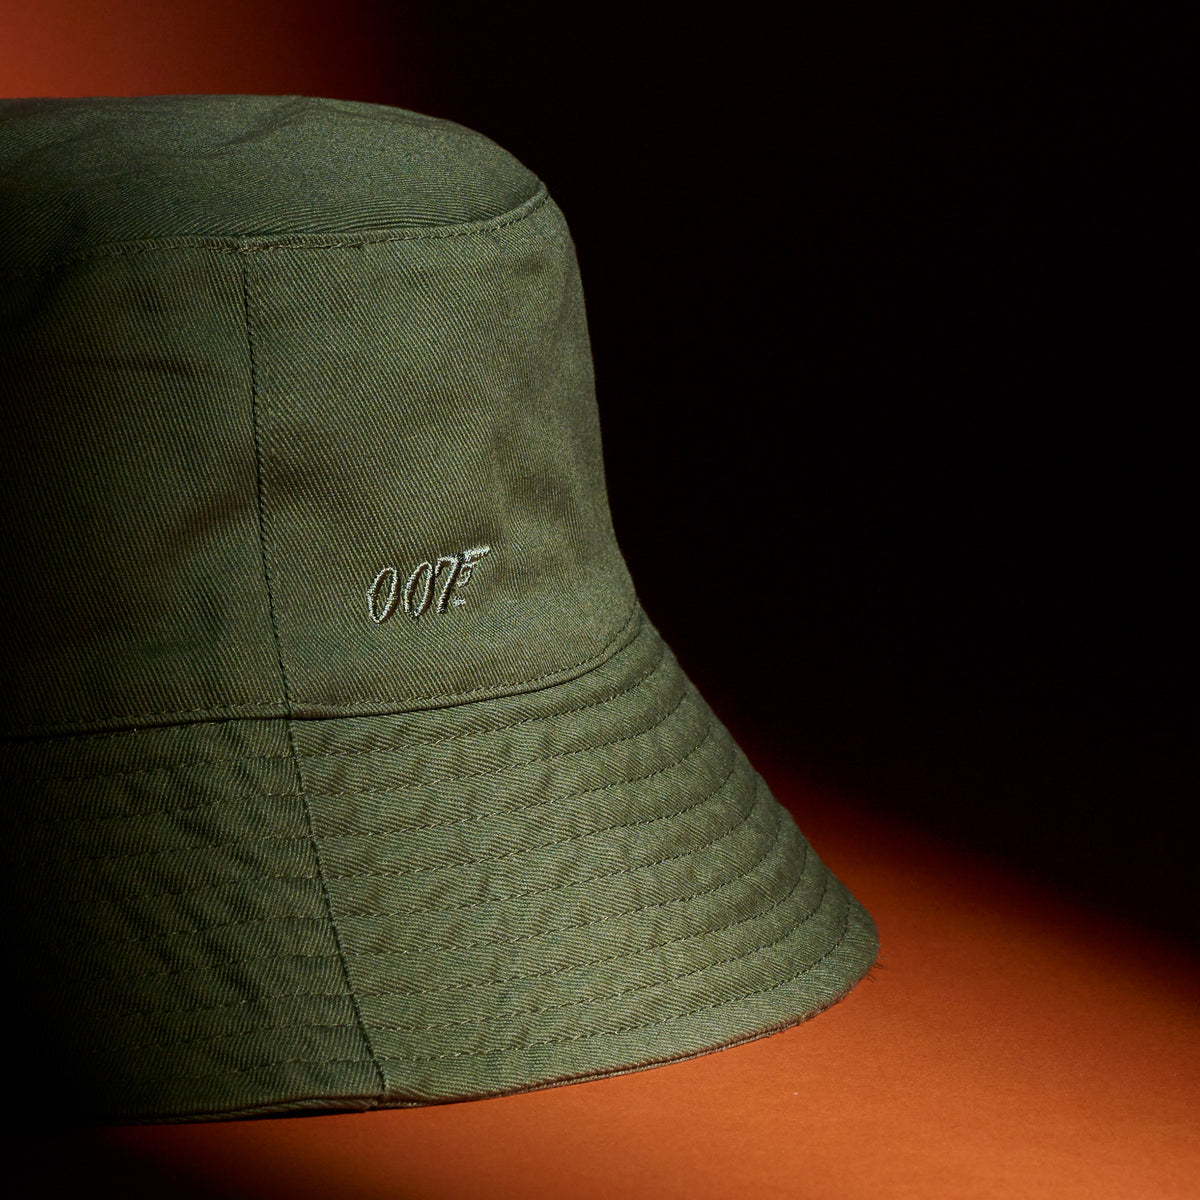 James Bond 007 Embroidered Cotton Twill Bucket Hat - Olive Edition